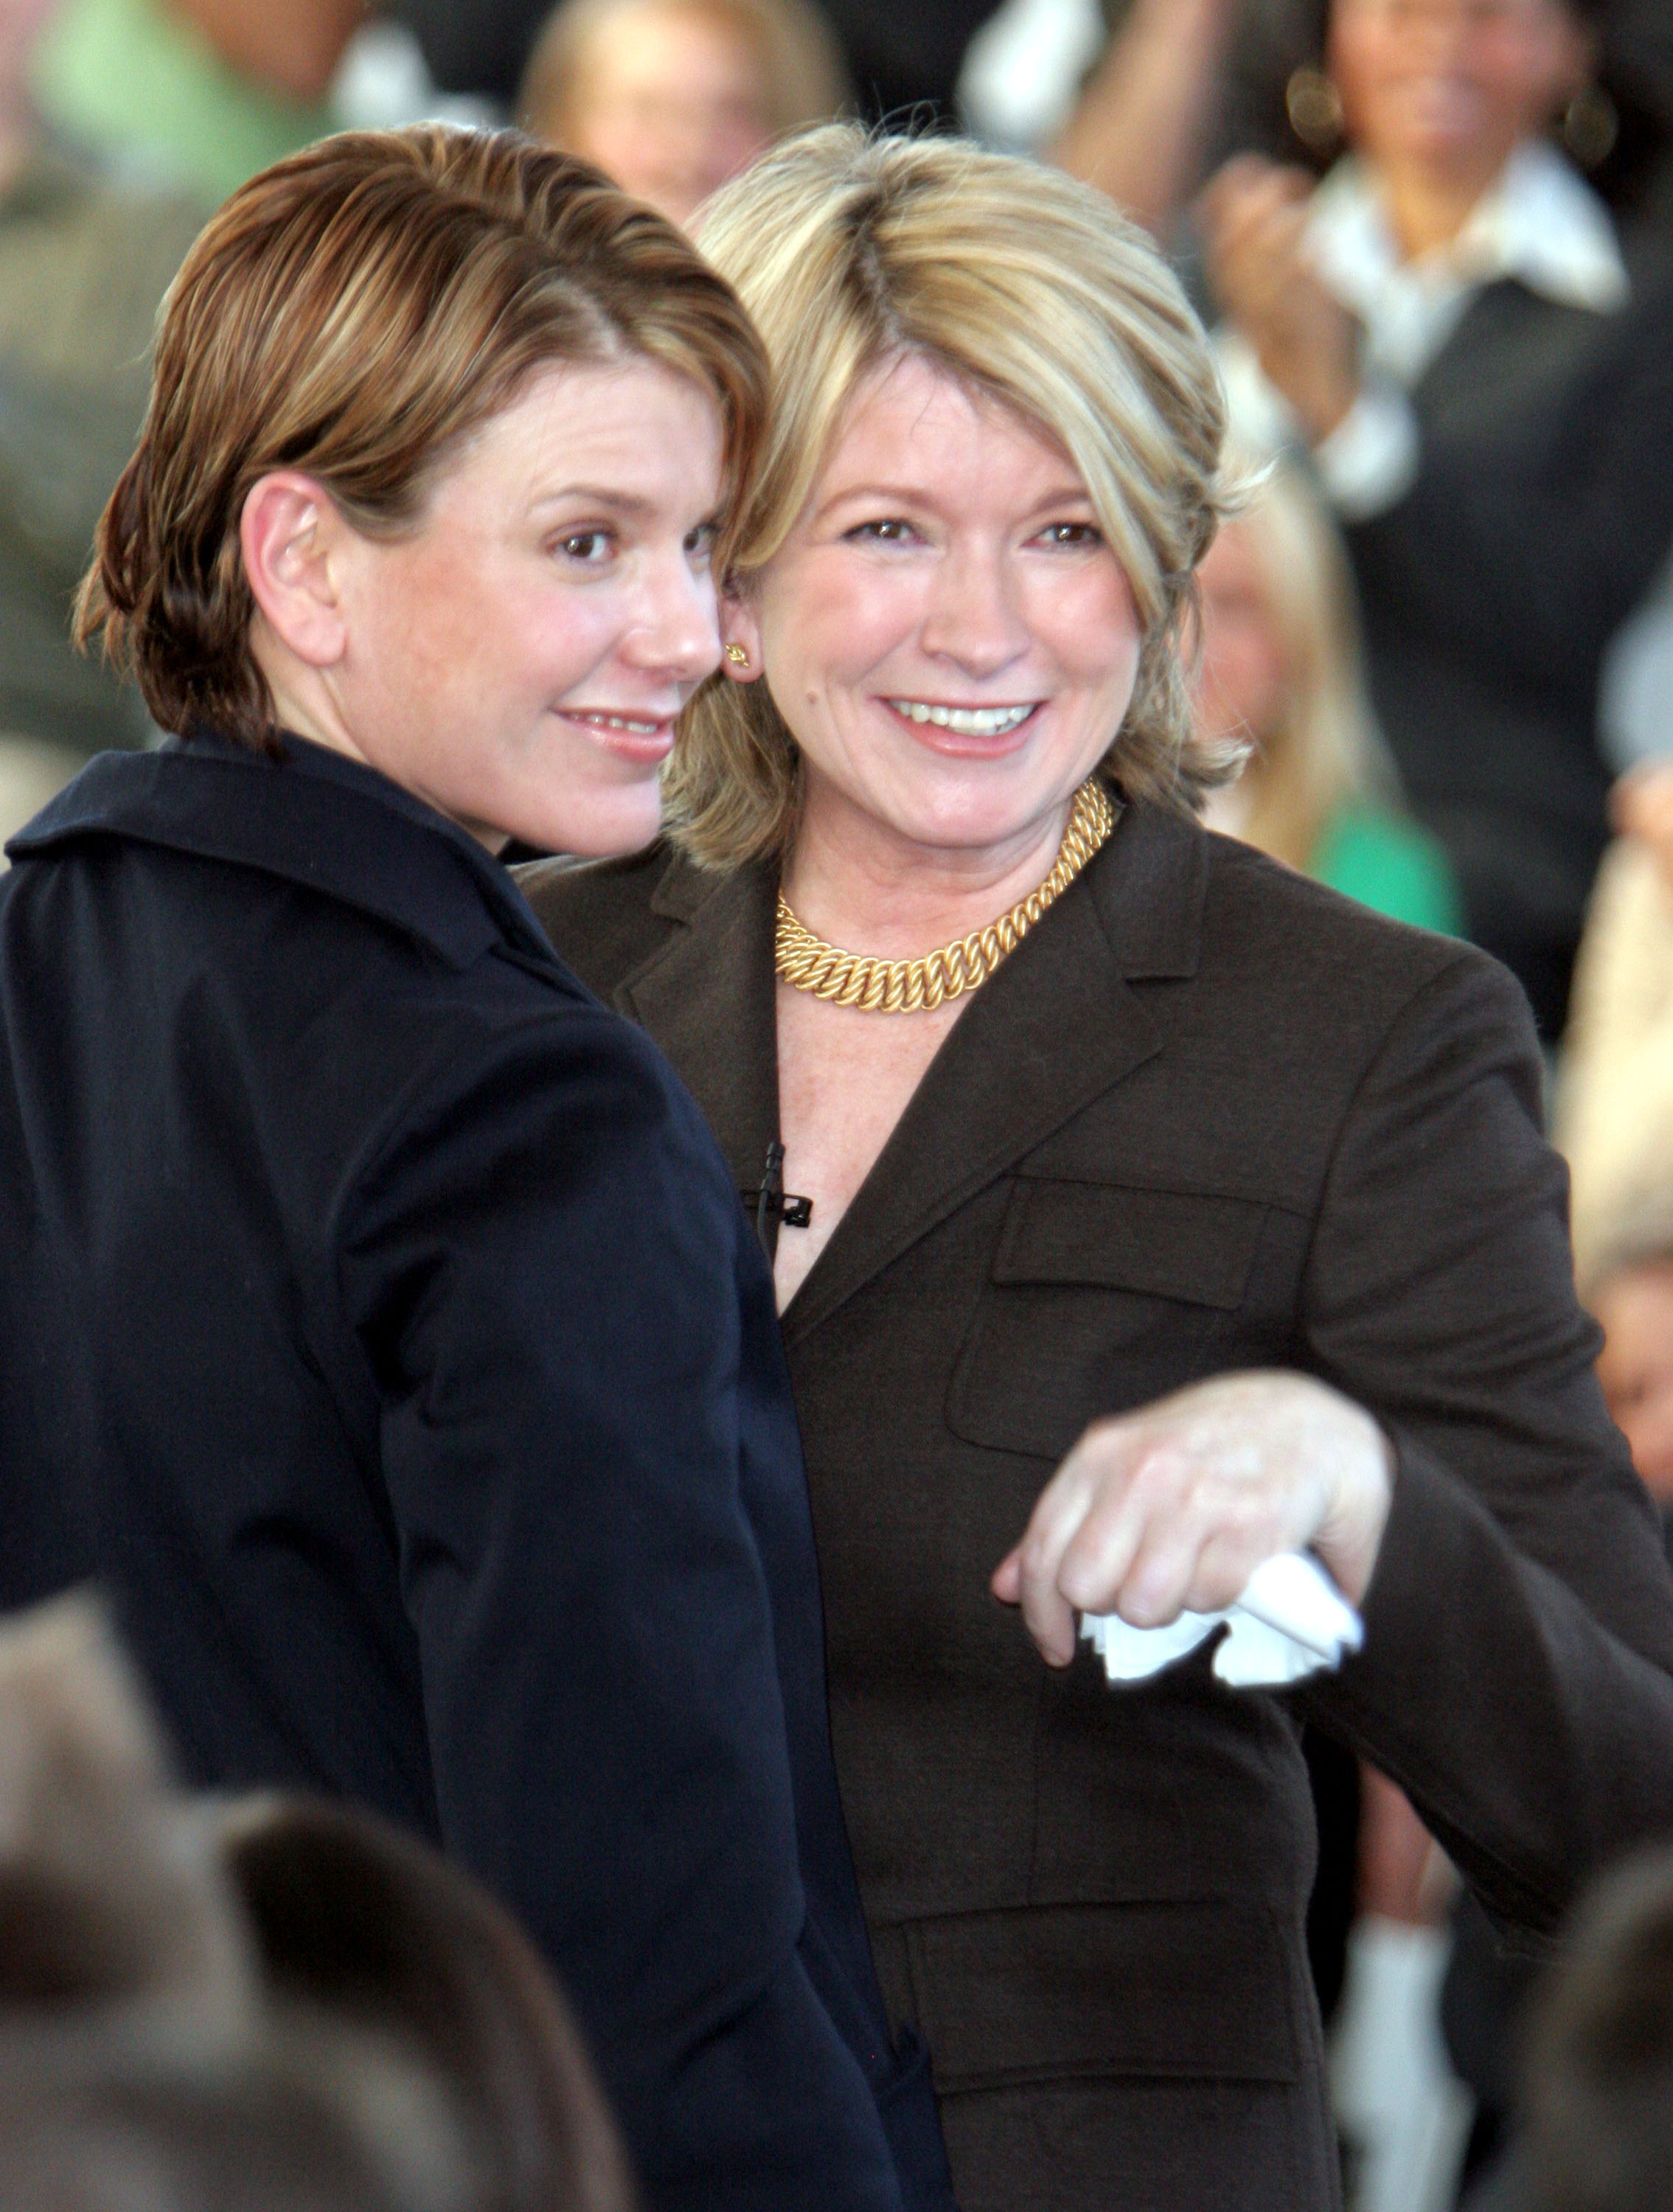 Martha Stewart and daughter Alexis during a press conference at Omnimedia Headquarters in New York City  | Source: Getty Images